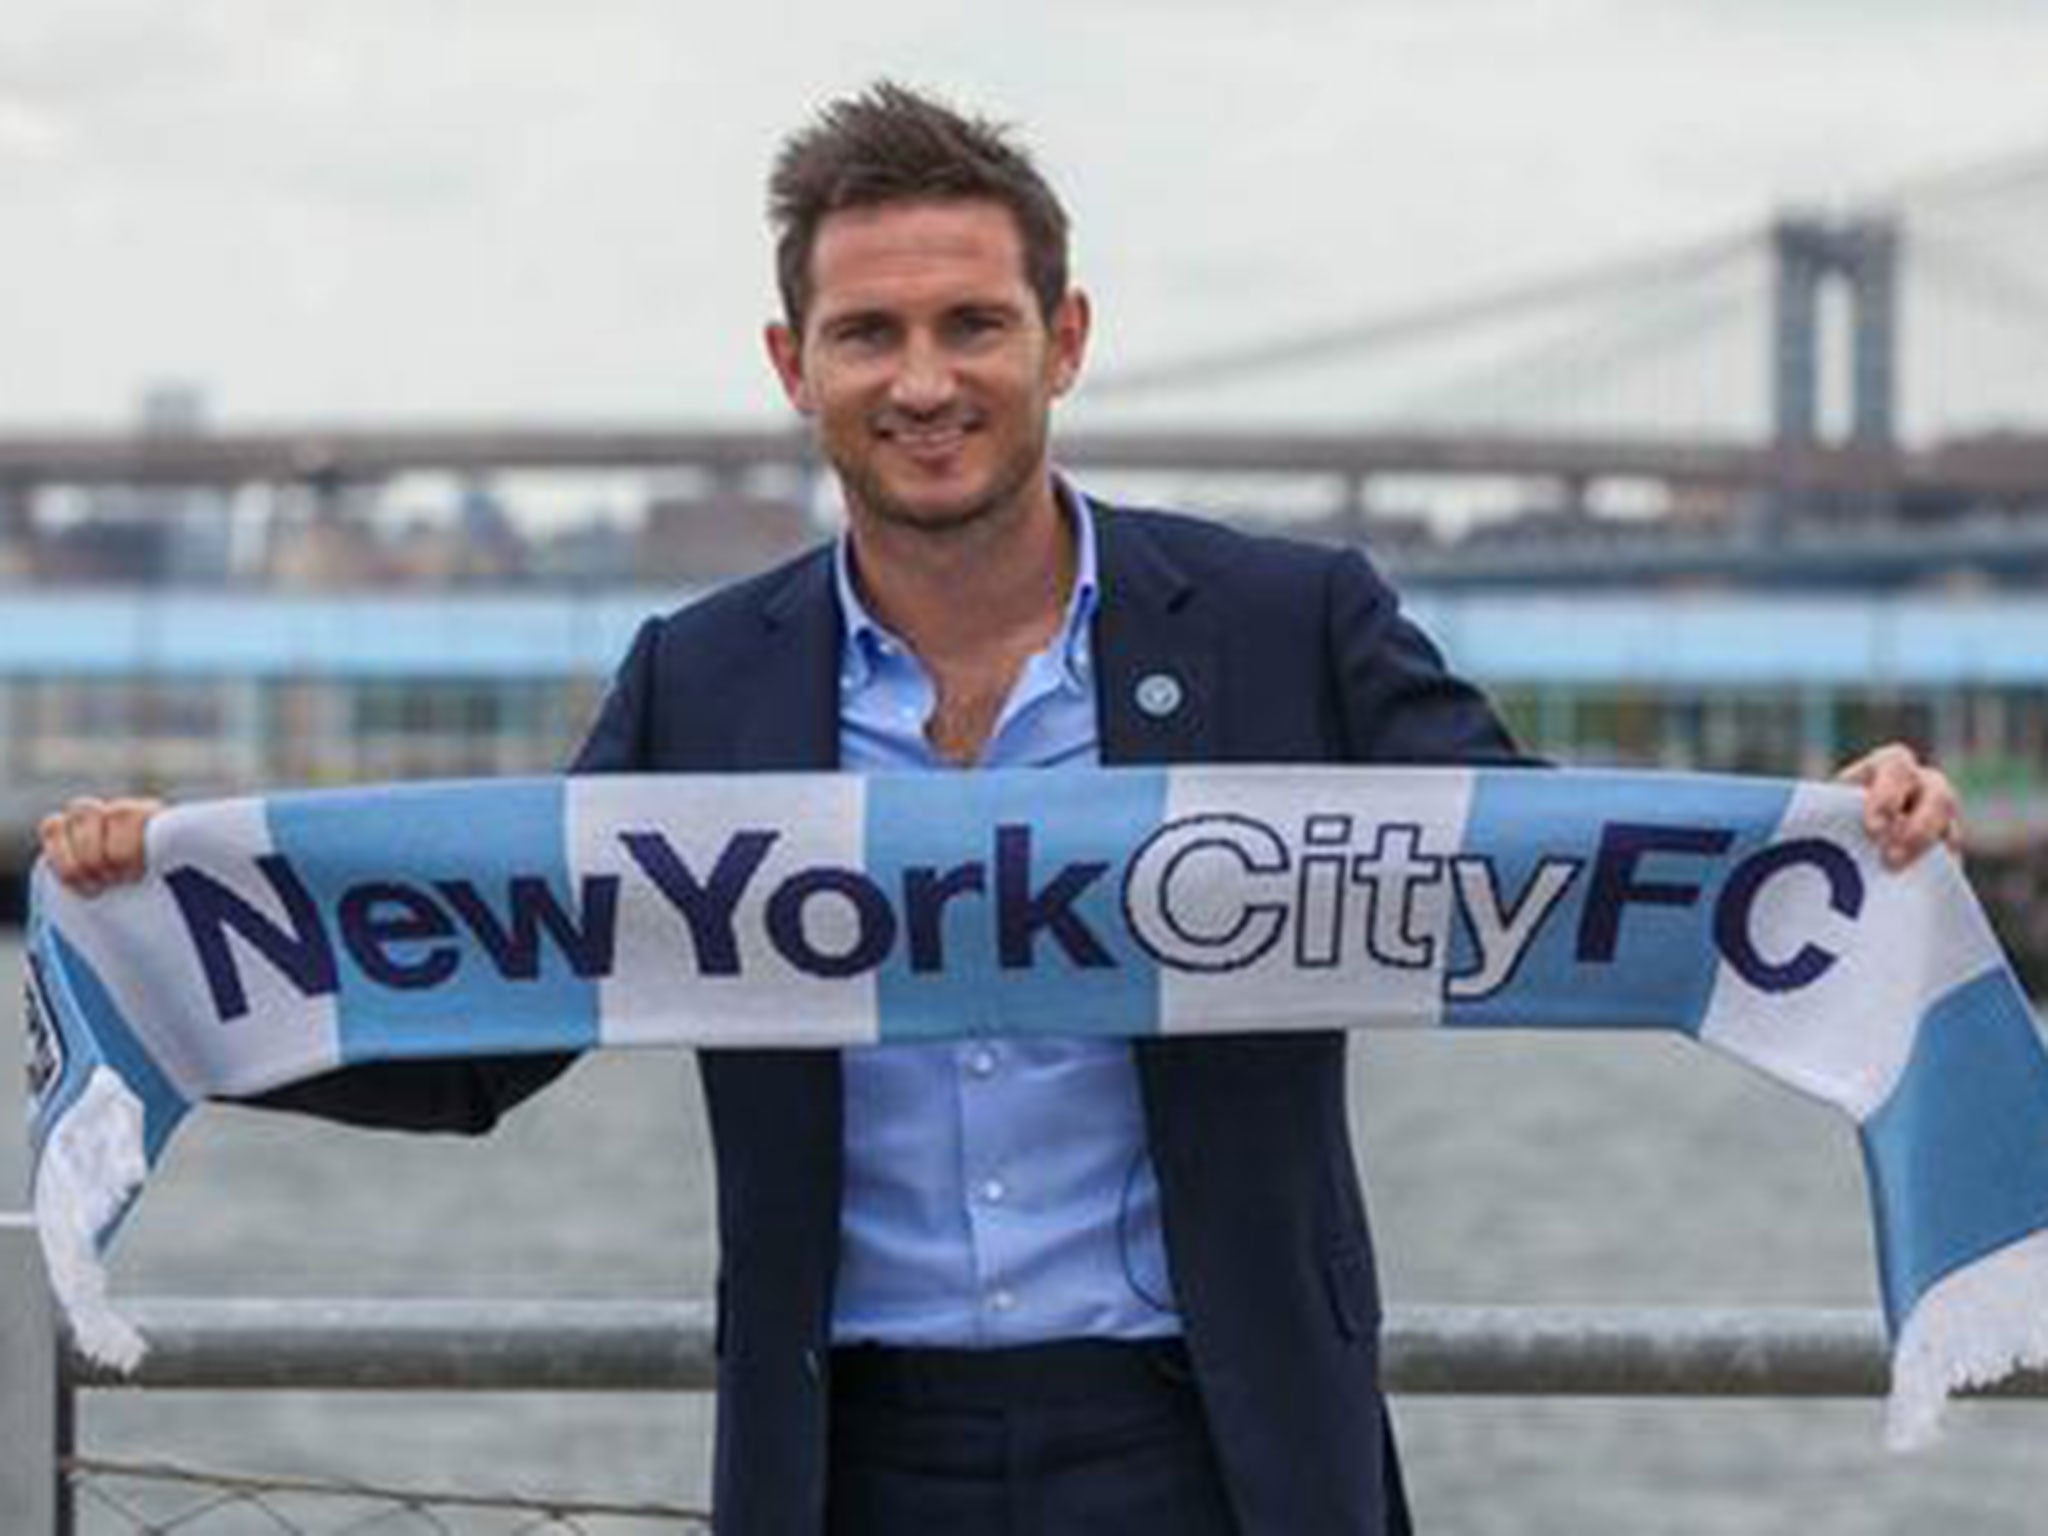 Frank Lampard will move to New York City after his stint in Manchester